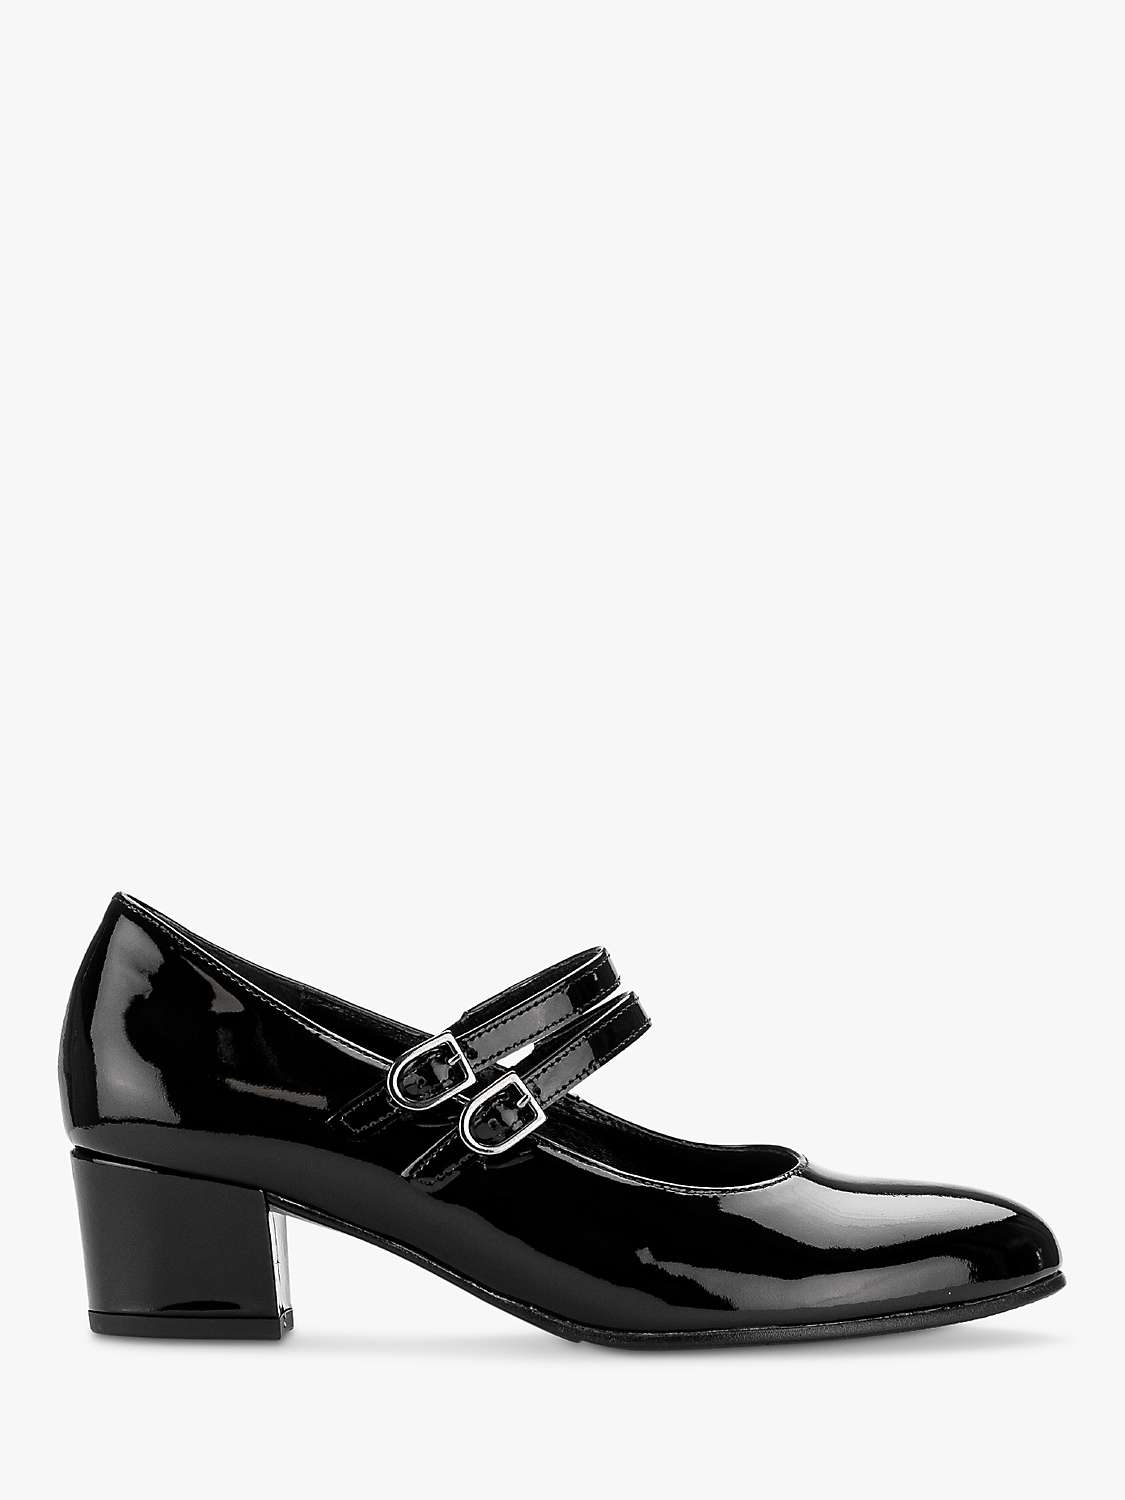 Buy Gabor Belva Wide Fit Patent Leather Mary Jane Shoes, Black Online at johnlewis.com